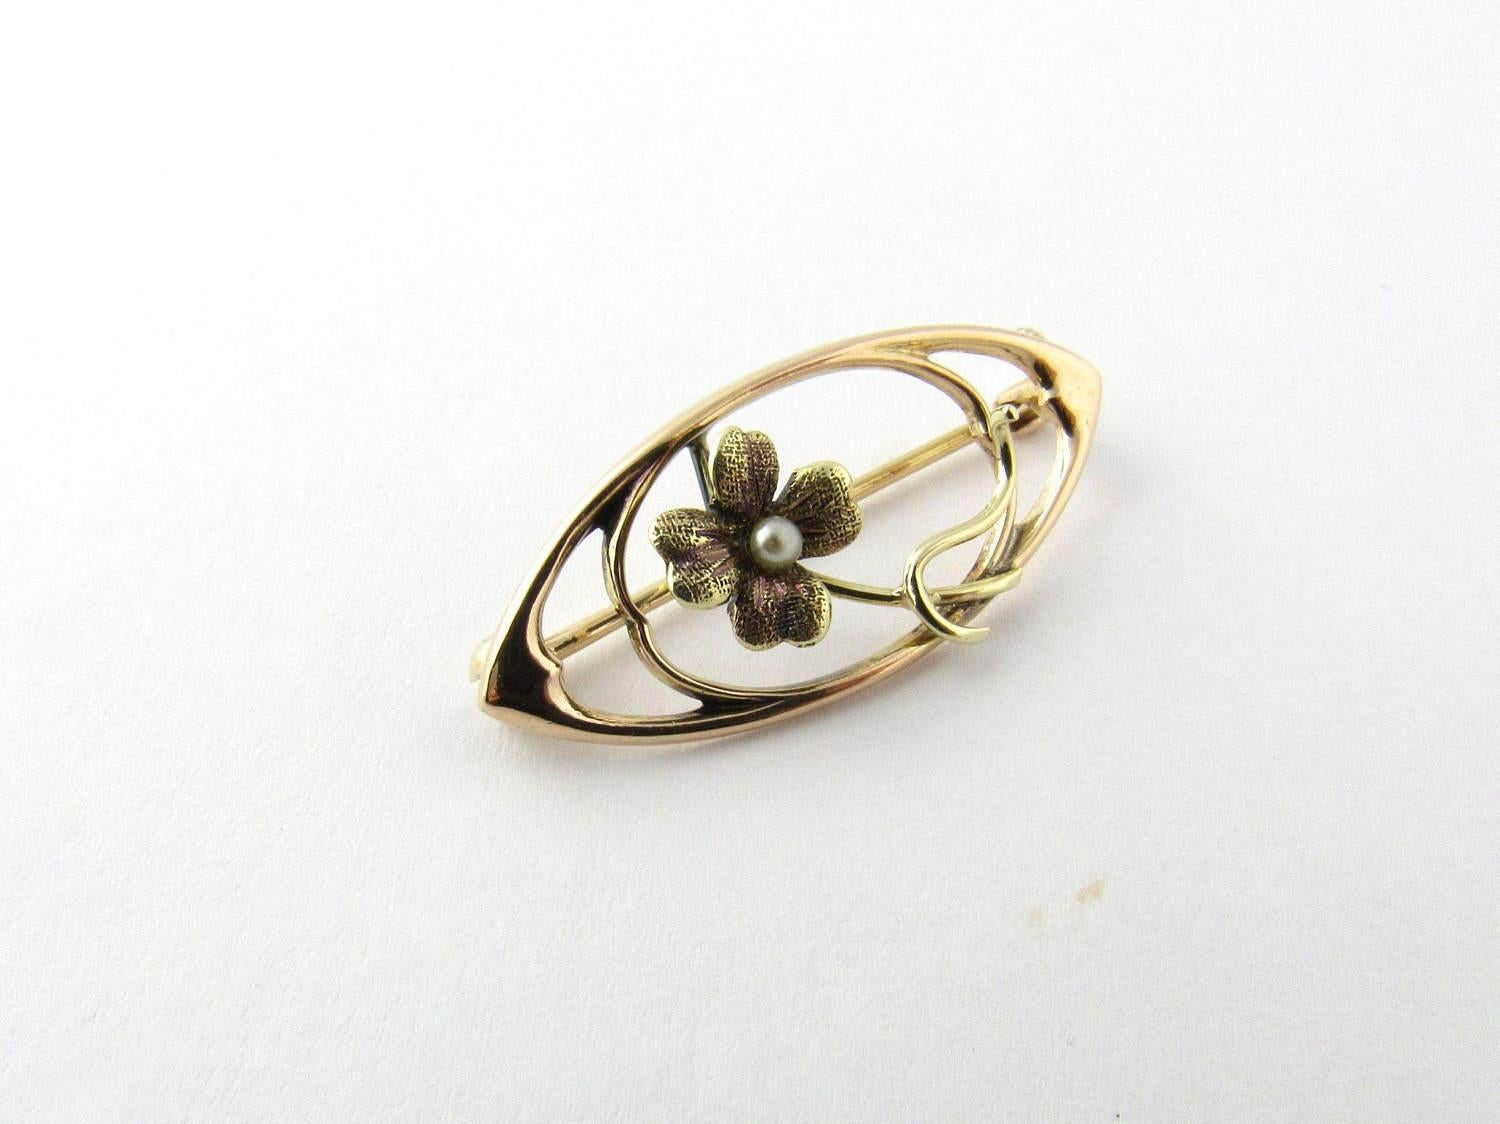 Vintage 14K Yellow Gold Seed Pearl Brooch. 

This brooch would would look simply beautiful as a dress or collar adornment. 

This brooch measures approx 10 mm x 6 mm x 24 mm. 

1.3 g / .8 dwt. 

1 seed pearl. 

This brooch is hallmarked 14K. 

This